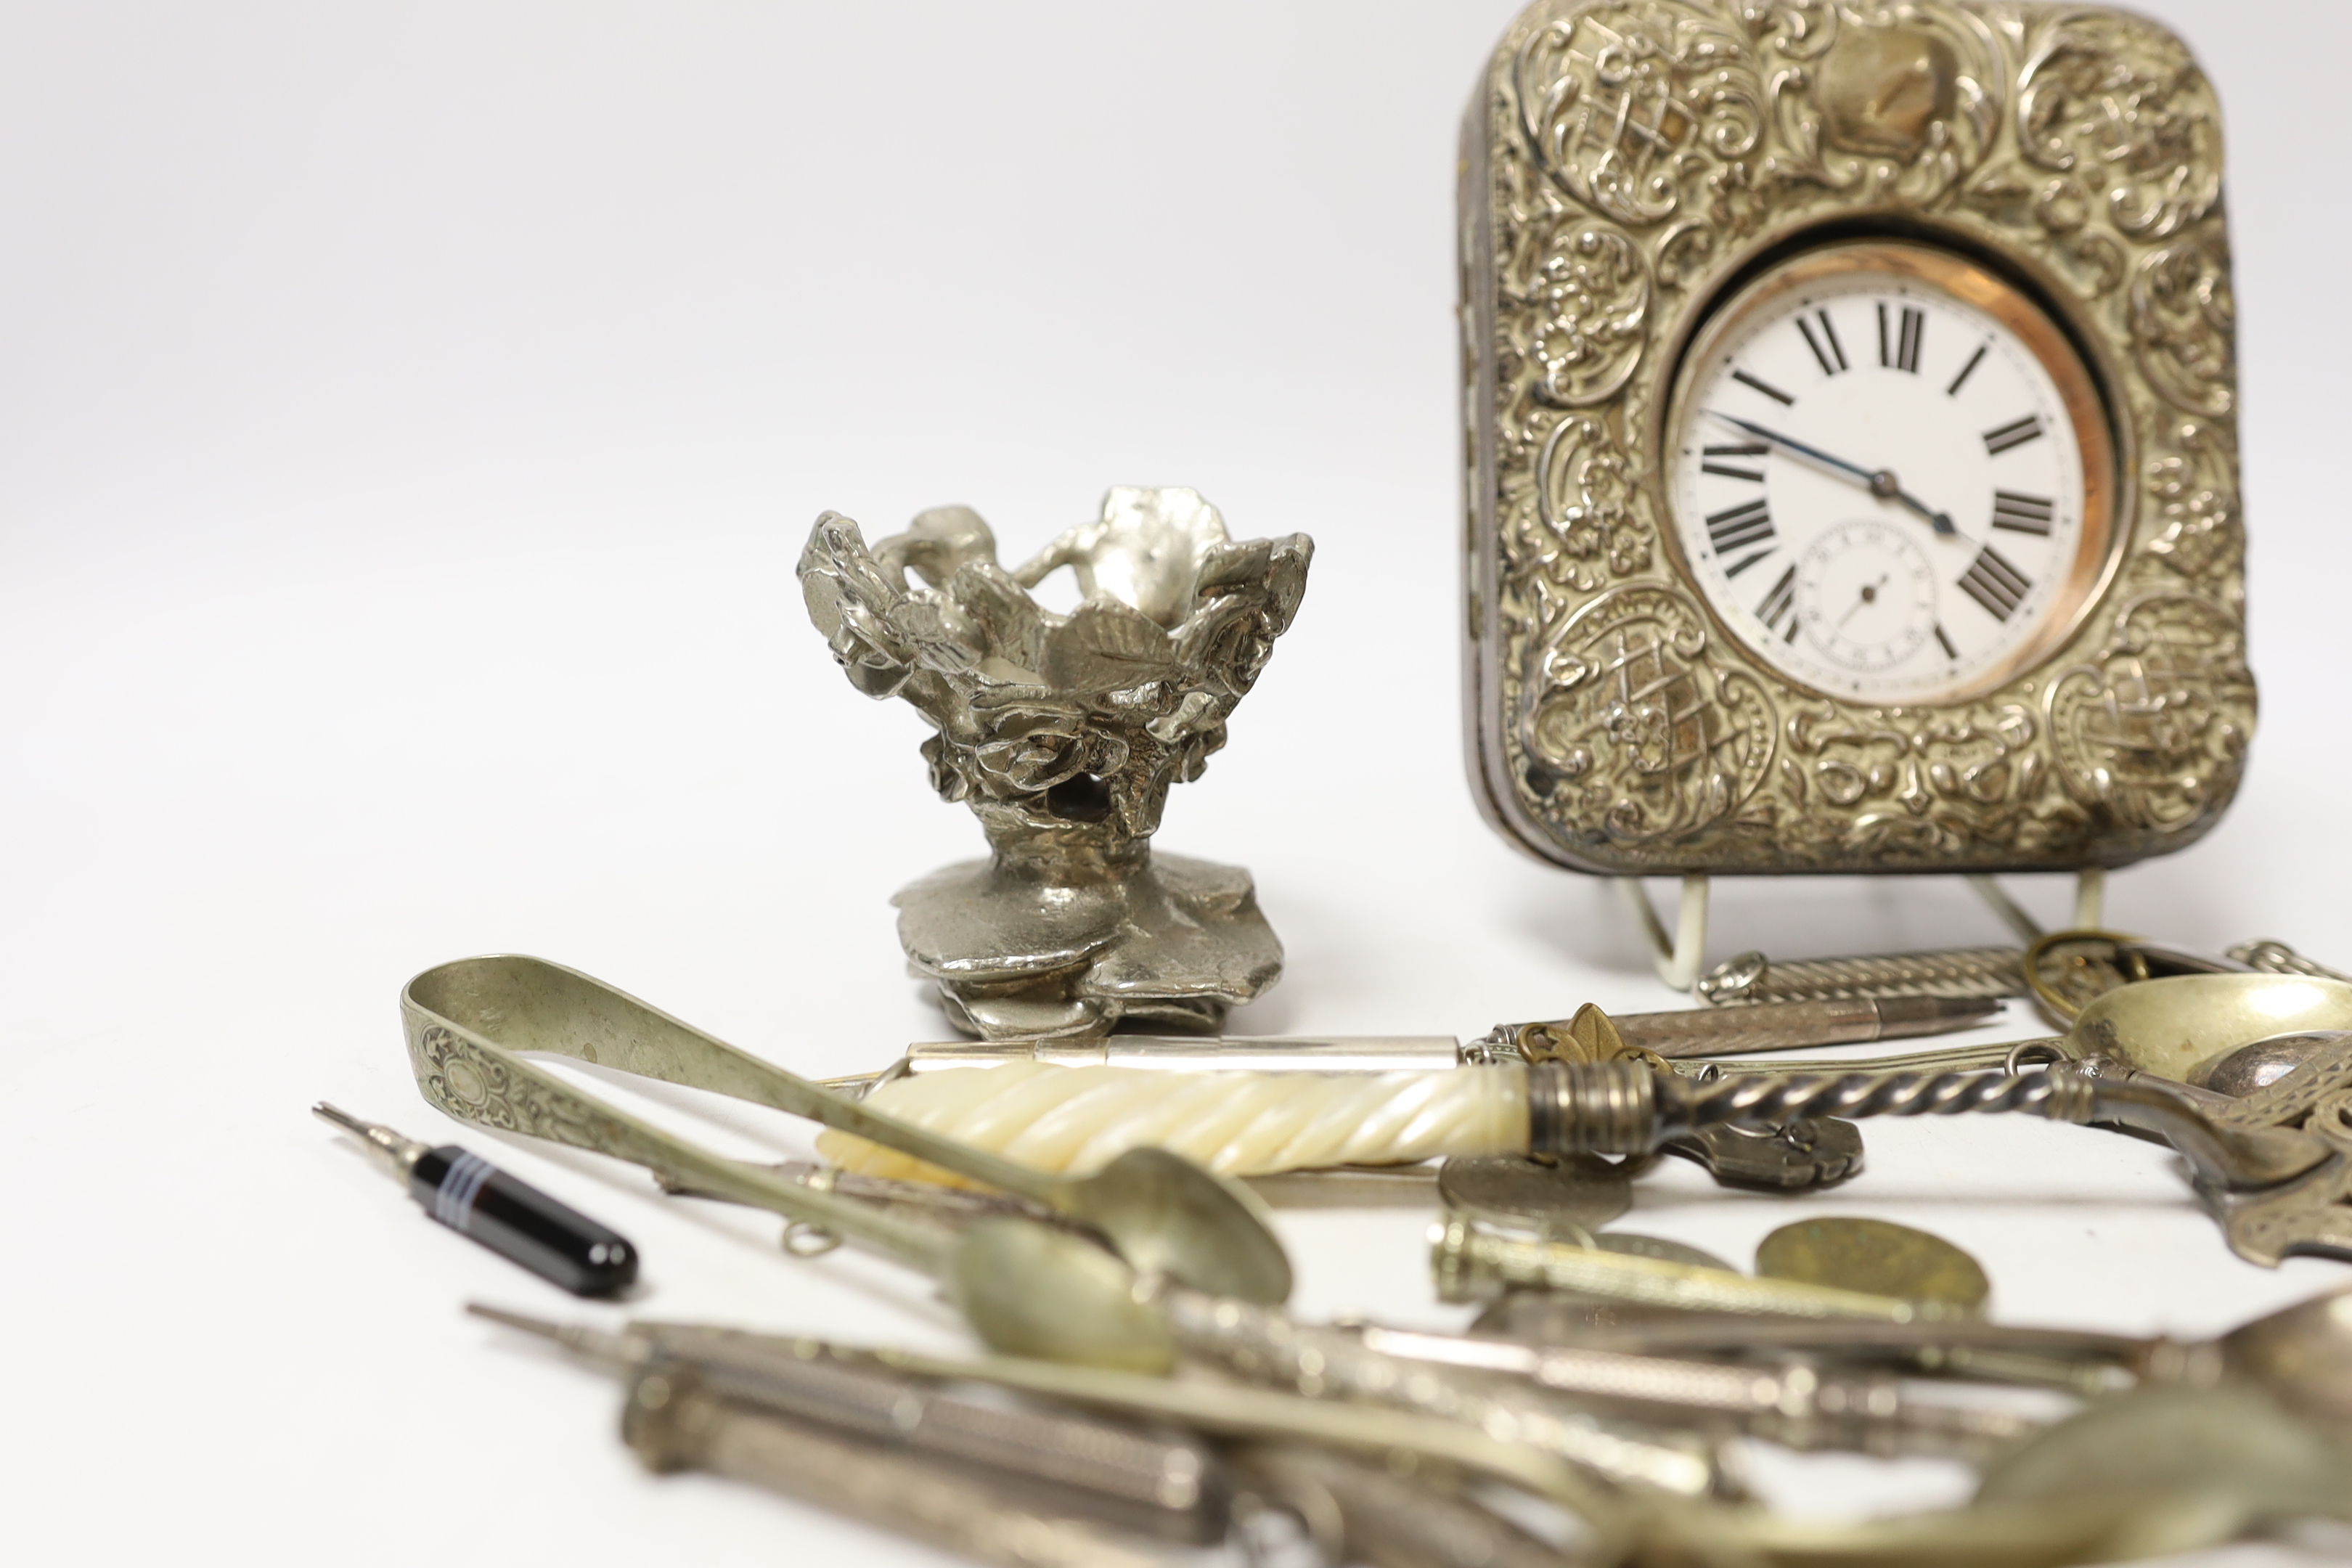 An Edwardian silver mounted travelling watch case, Birmingham, 1903, 11.4cm, and other items including plated flatware, coins and a group of propelling pencils including Sampson Mordan & Co, etc.